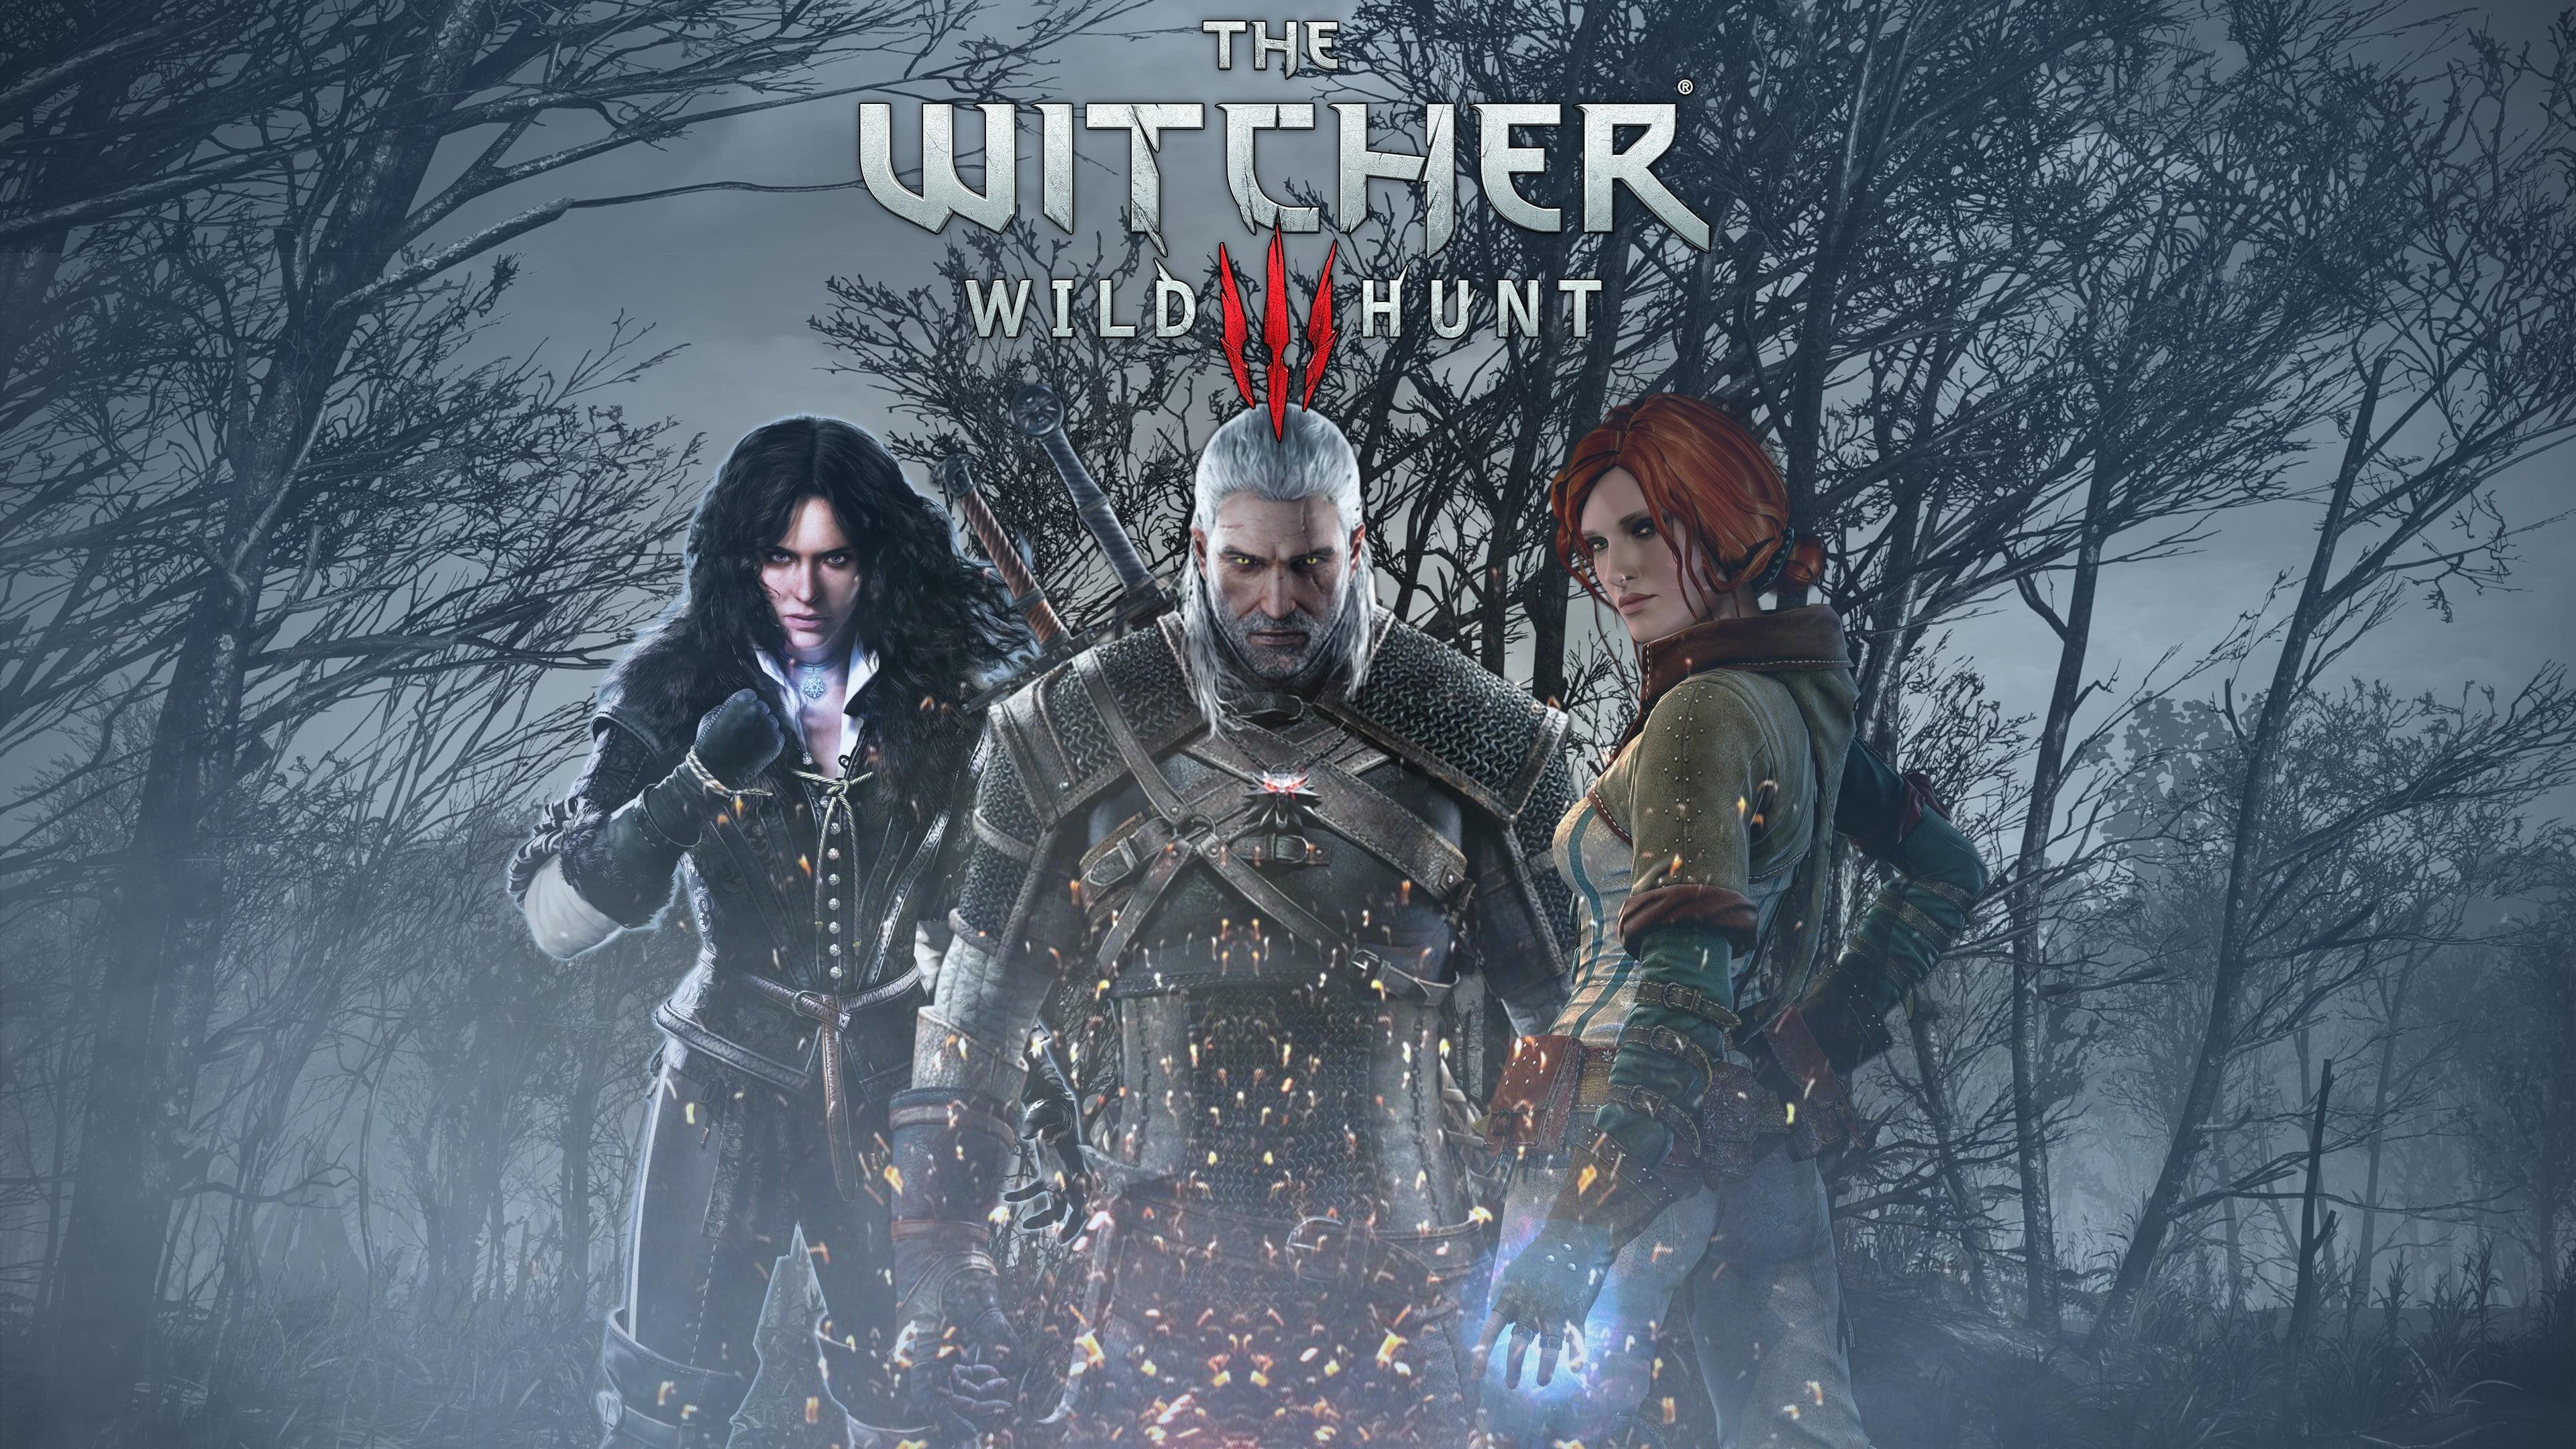 3840 x 2160 · jpeg - The Witcher 3 Wild Hunt Poster Wallpapers - Wallpaper Cave